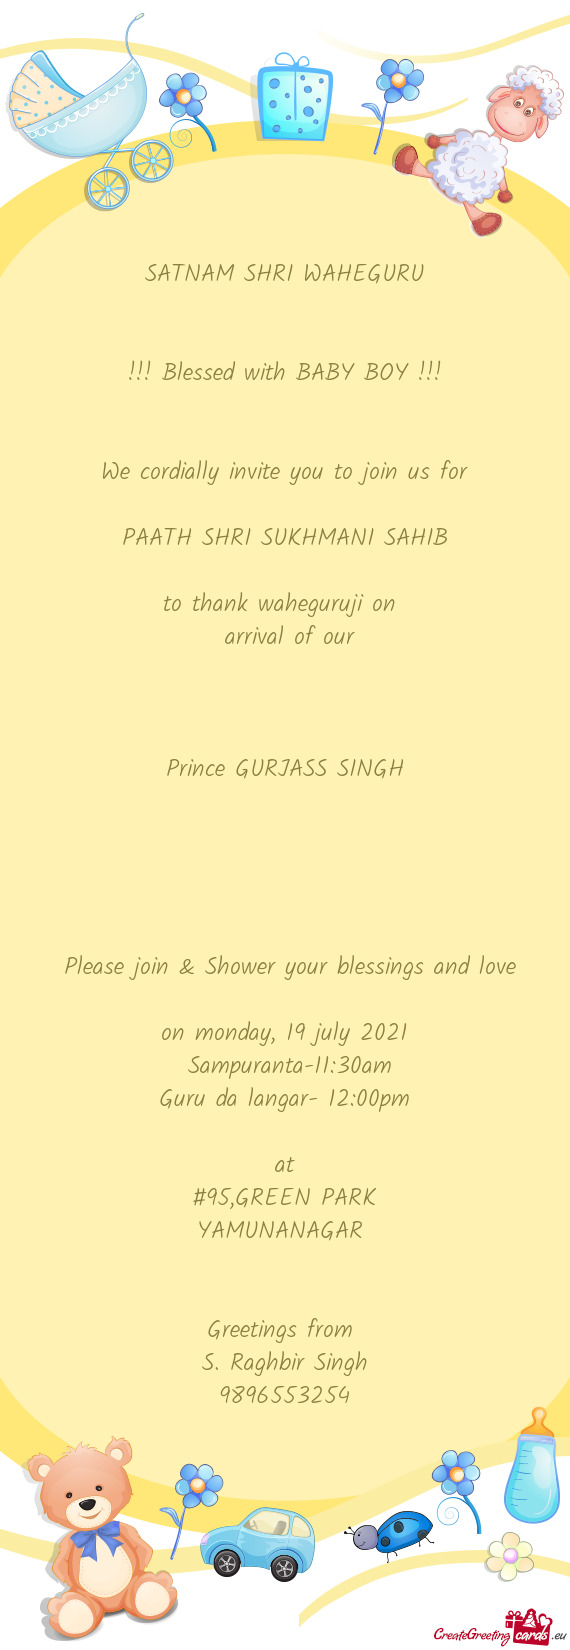 Please join & Shower your blessings and love